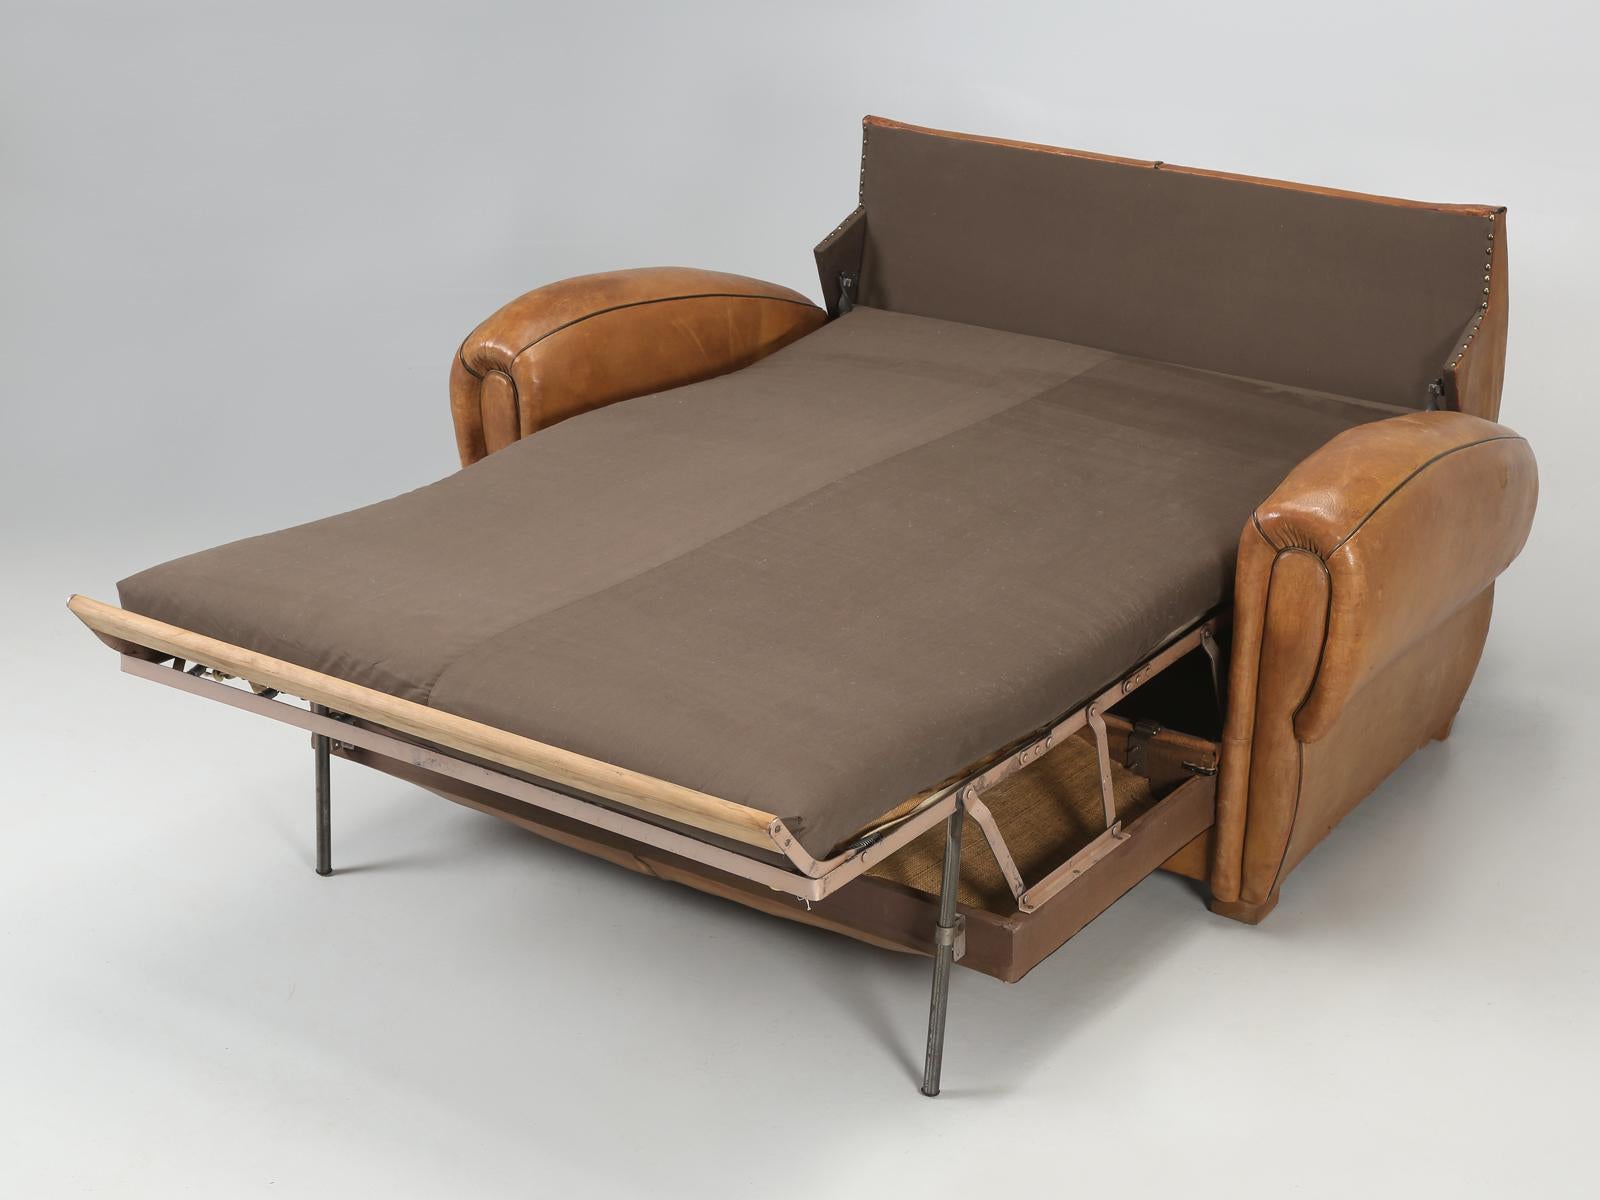 French Art Deco leather settee that also opens into a bed. Over the past 30 years we have had a couple of the French leather settees, but never in this nice of condition. The leather is absolutely all original and we basically did not have to touch